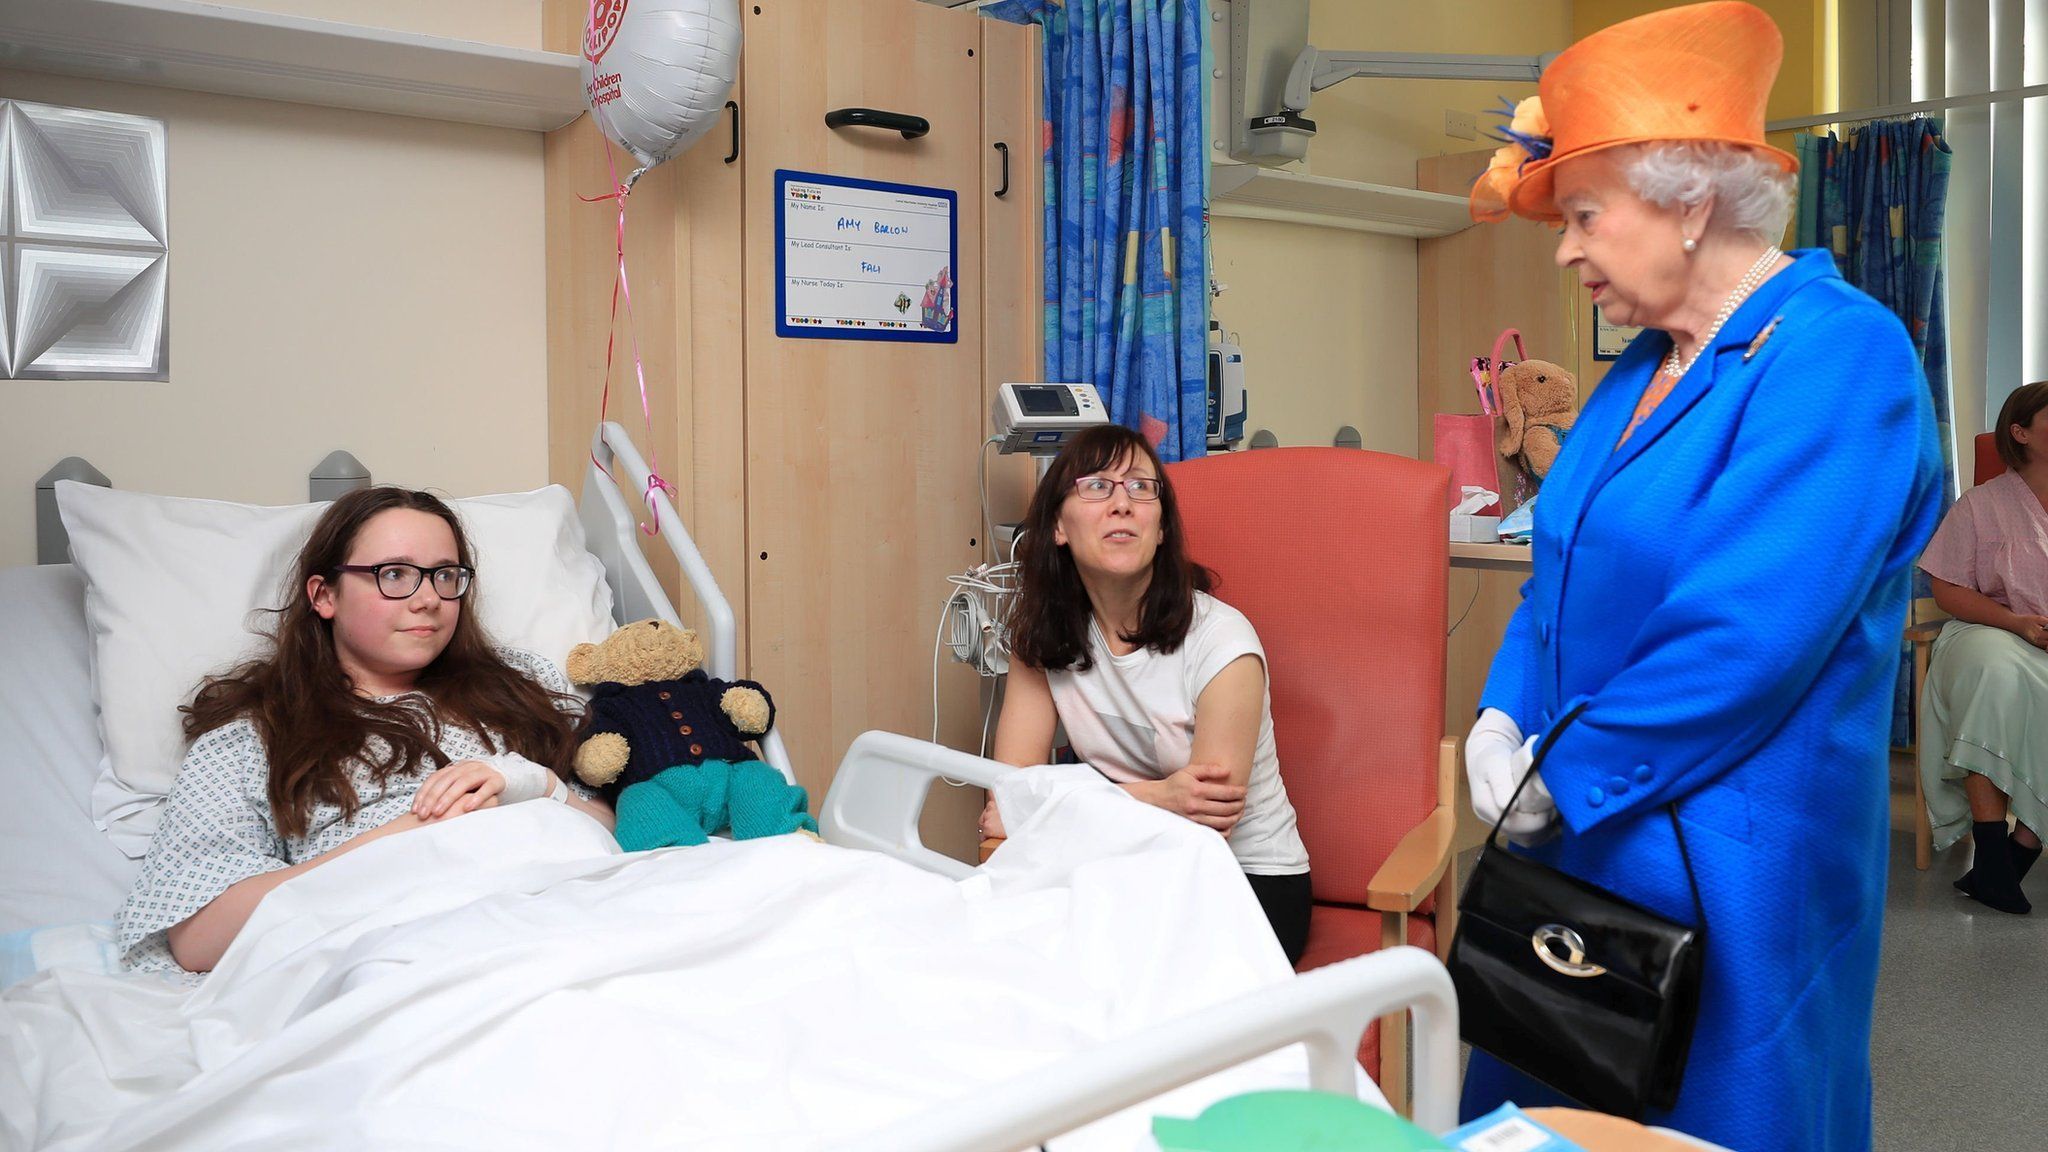 Queen meets with Amy Barlow at Manchester Children's Hospital